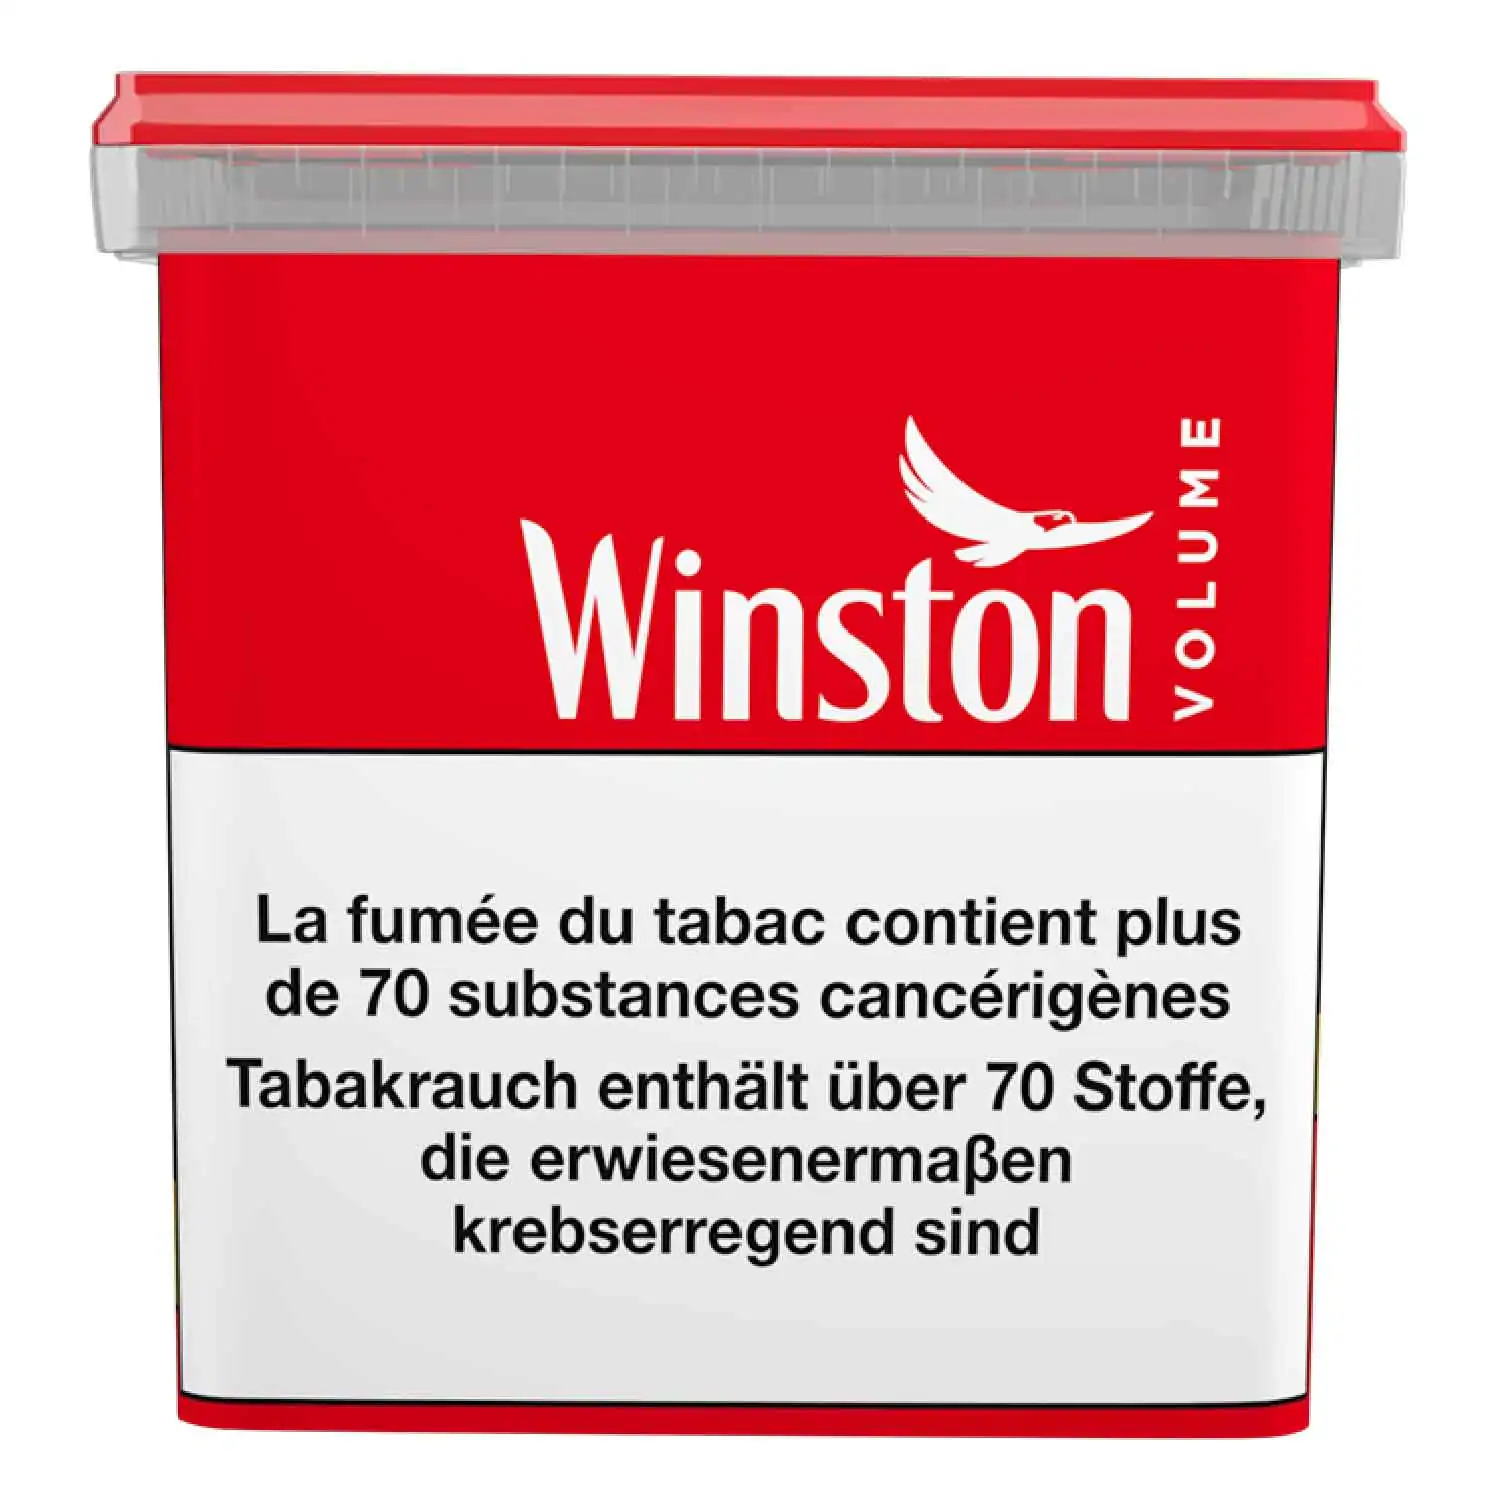 Winston volume red 400g - Buy at Real Tobacco